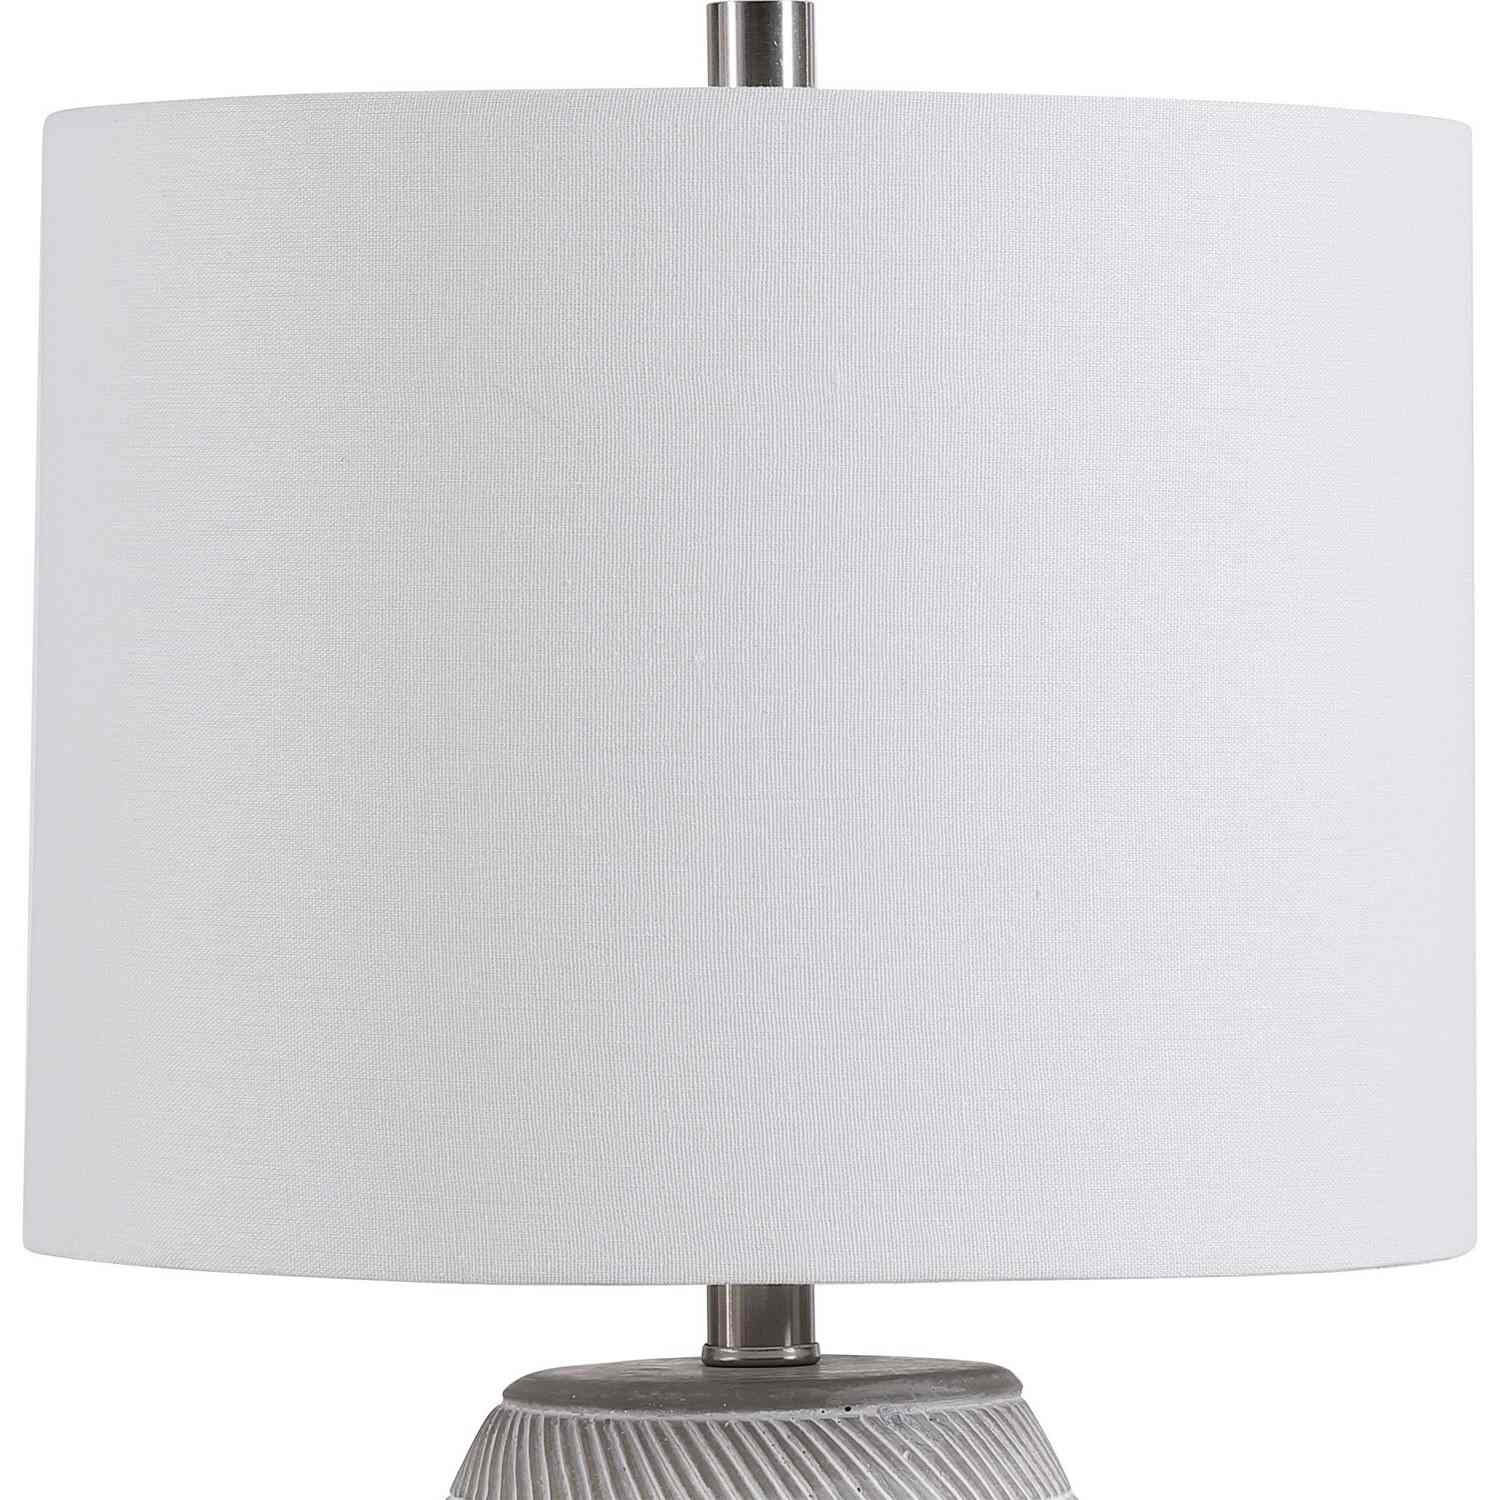 Uttermost W26064-1 Table Lamp - Gray/White